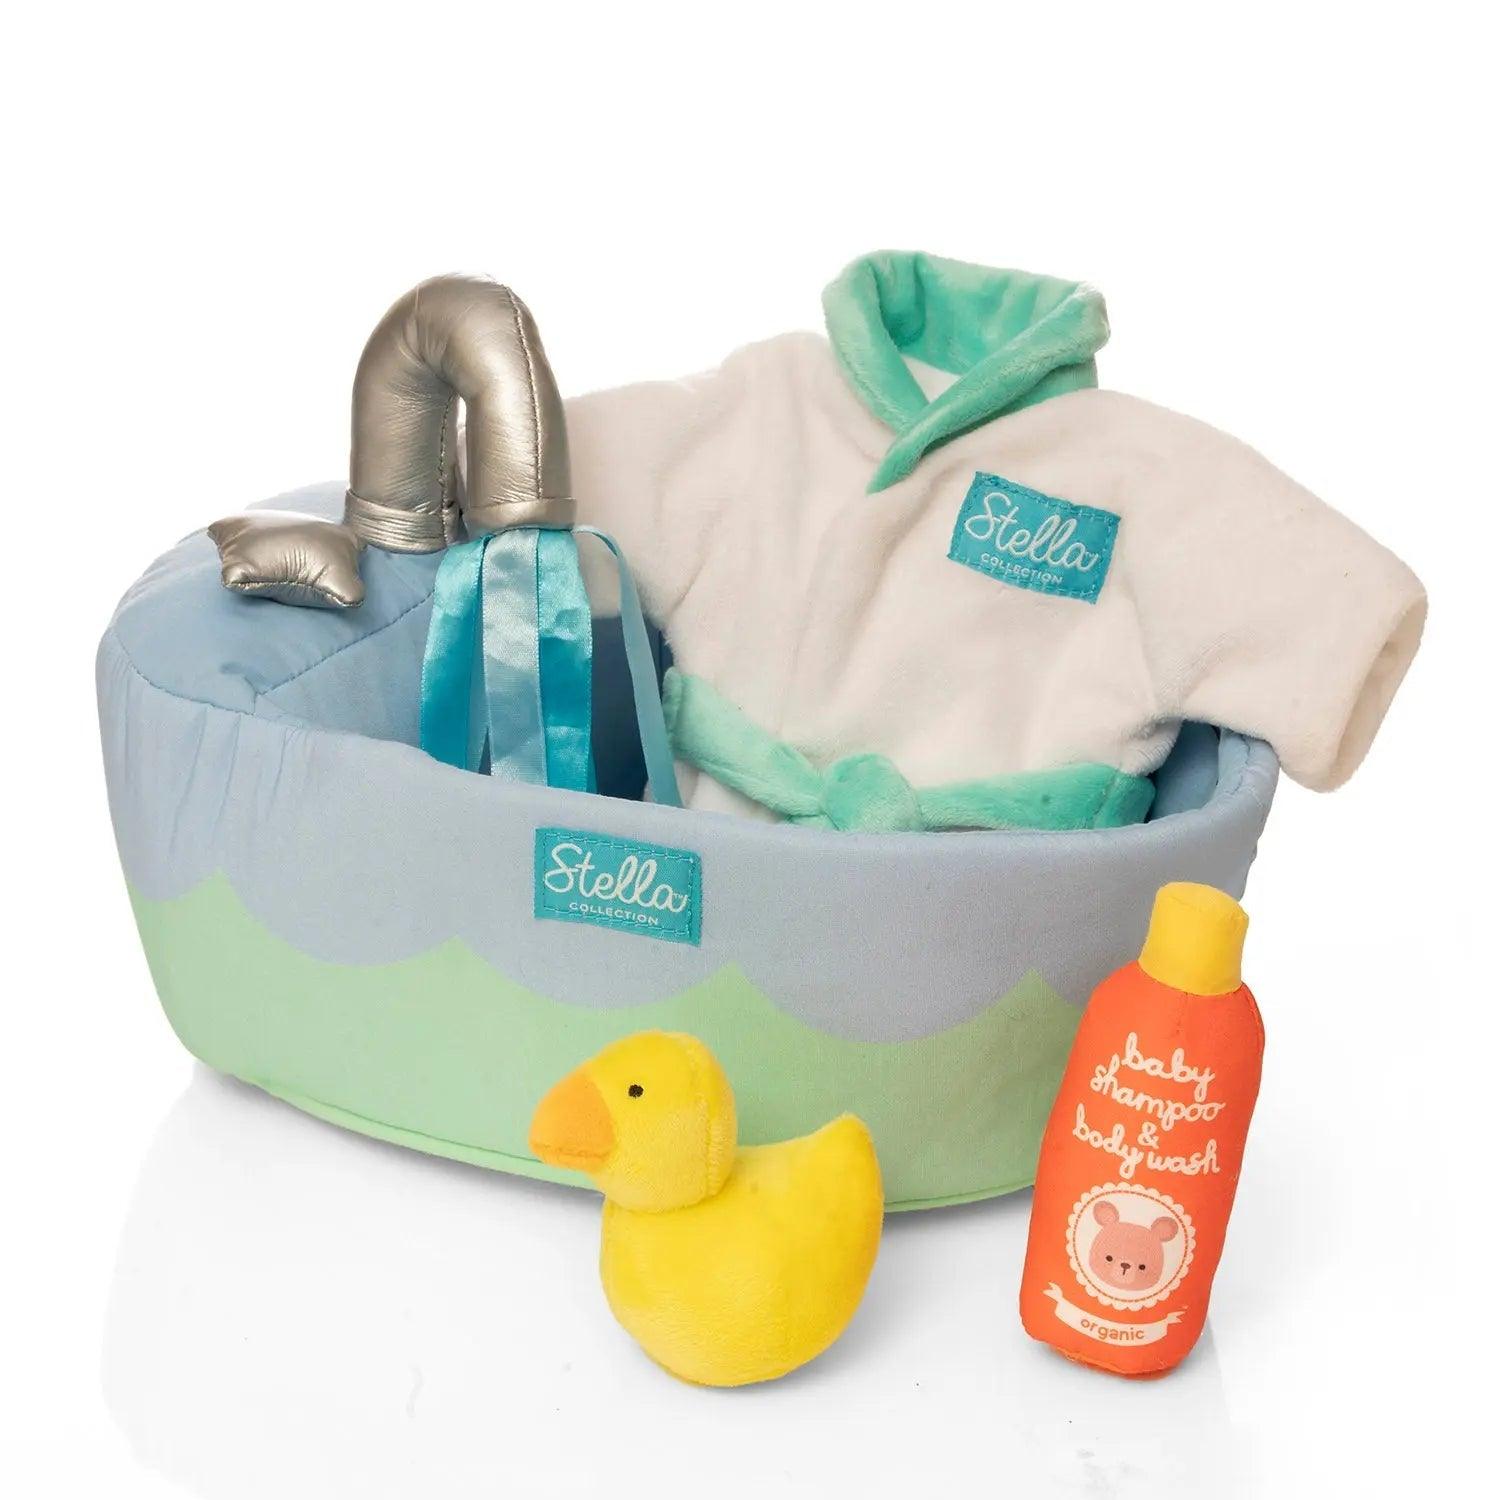 Stella Collection Bath Set - Why and Whale